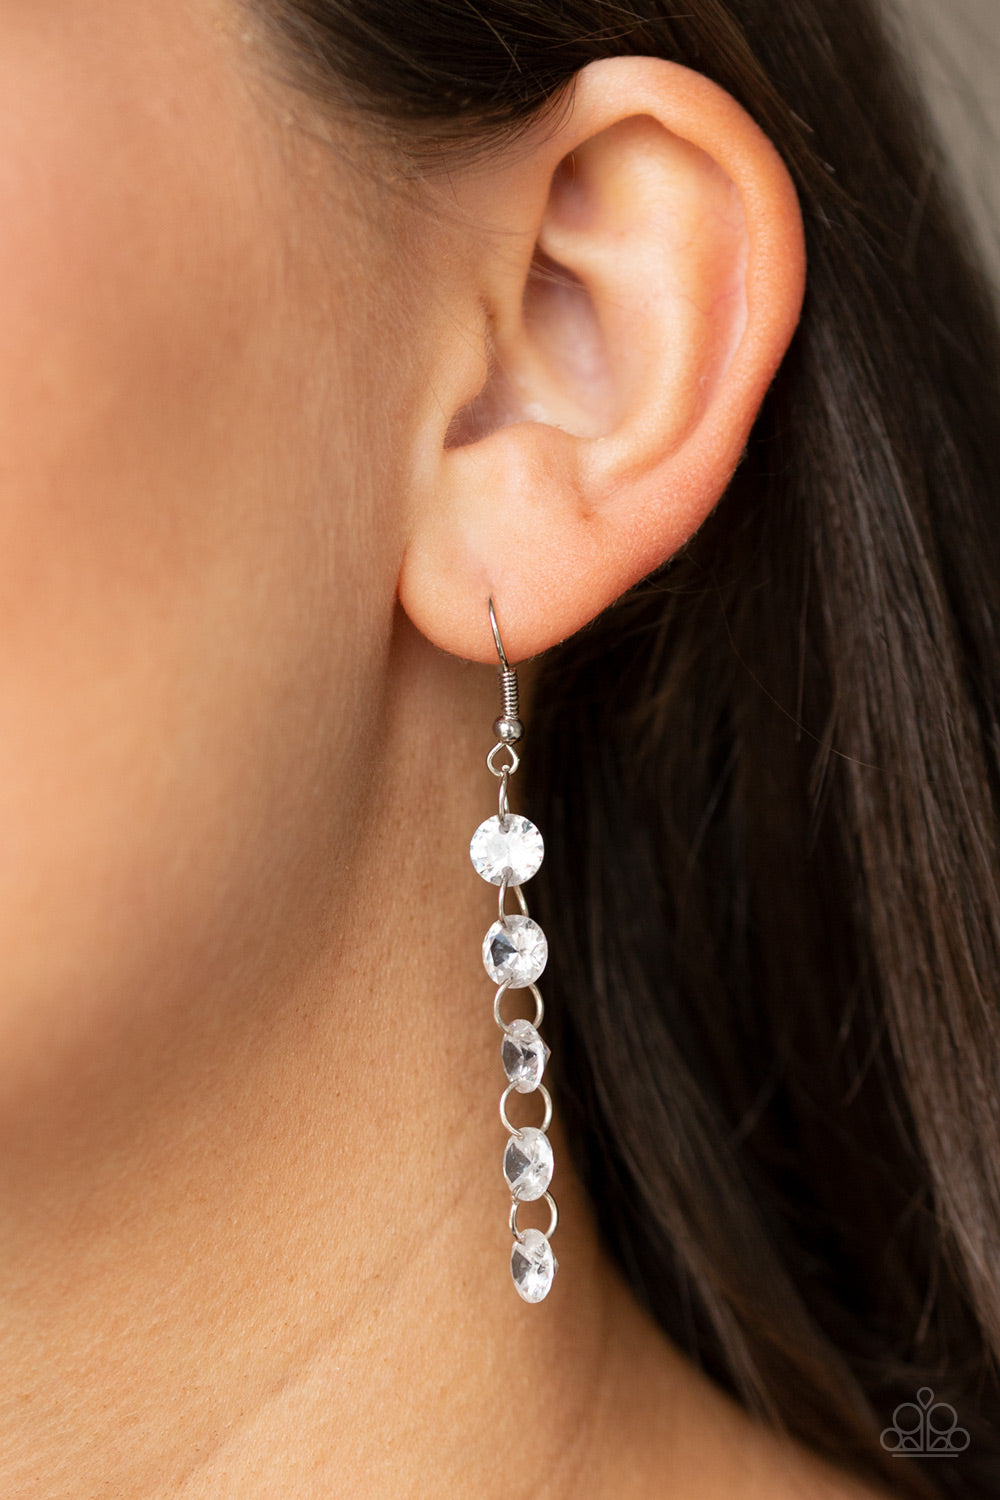 Trickle-Down Effect - White Earrings - Princess Glam Shop